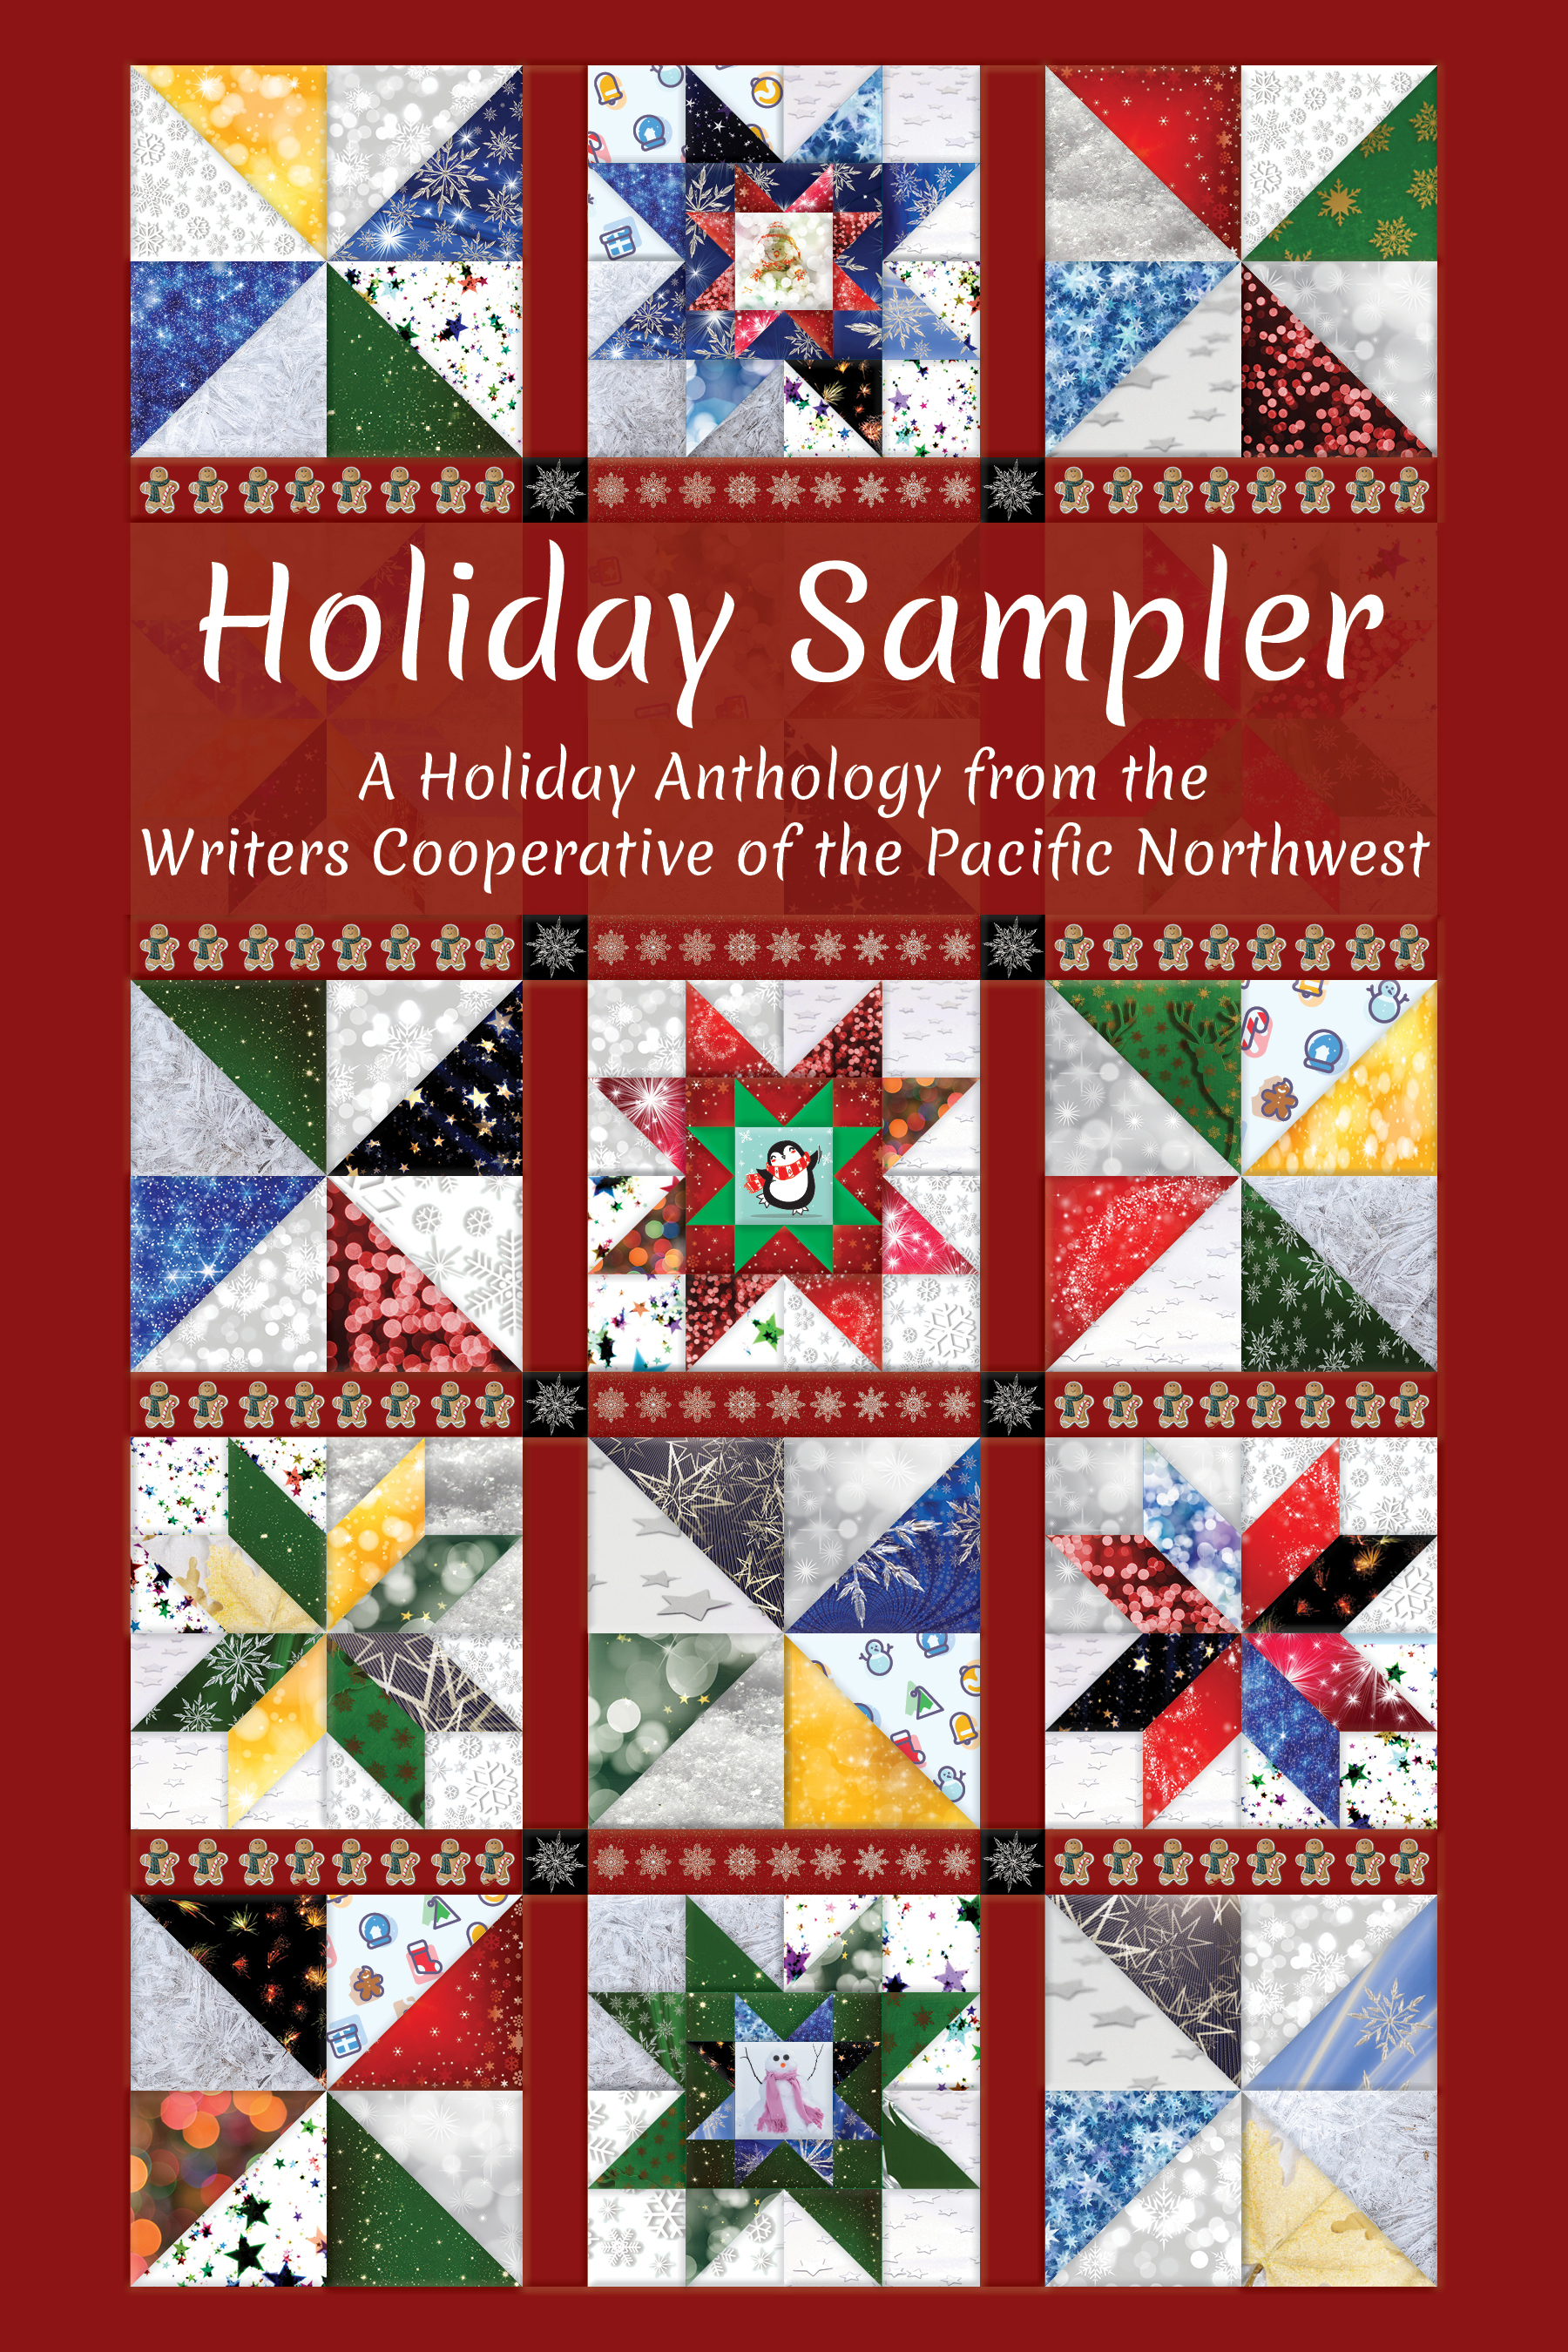 Holiday Sampler by the Writers Cooperative of the Pacific Northwest